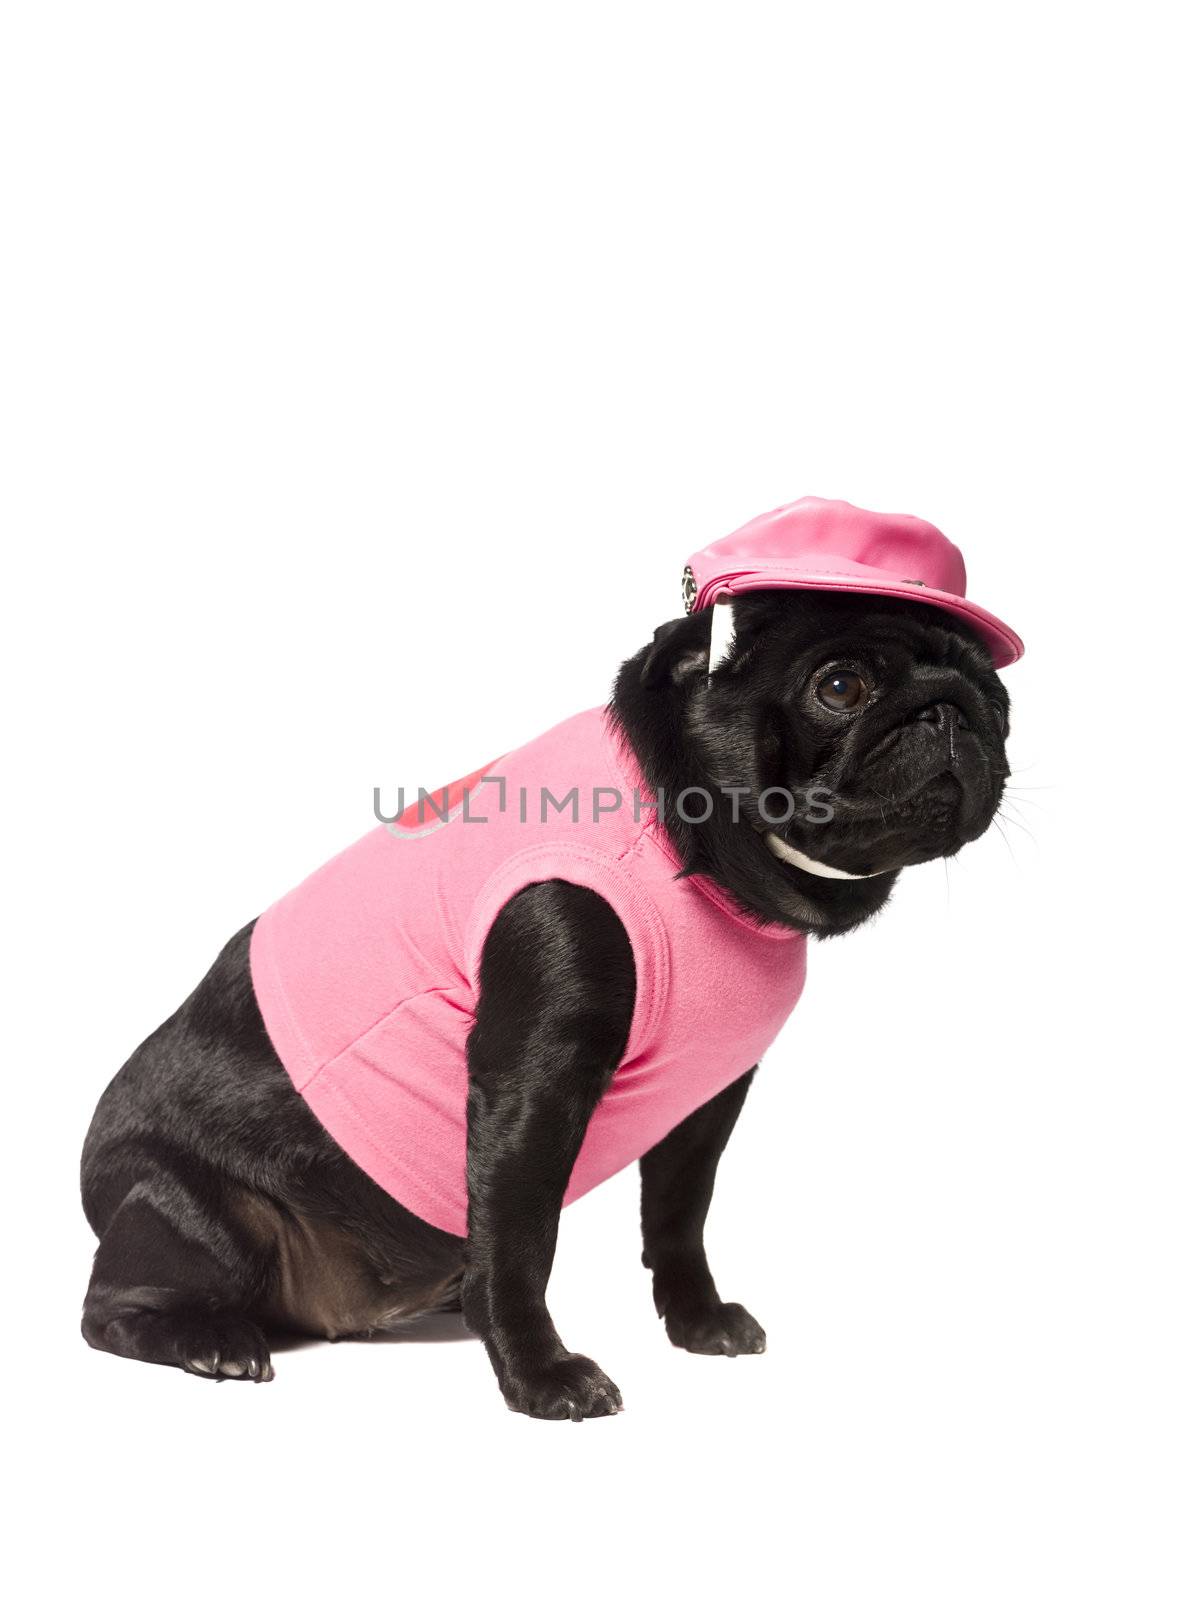 Dog dressed in pink isolated on white